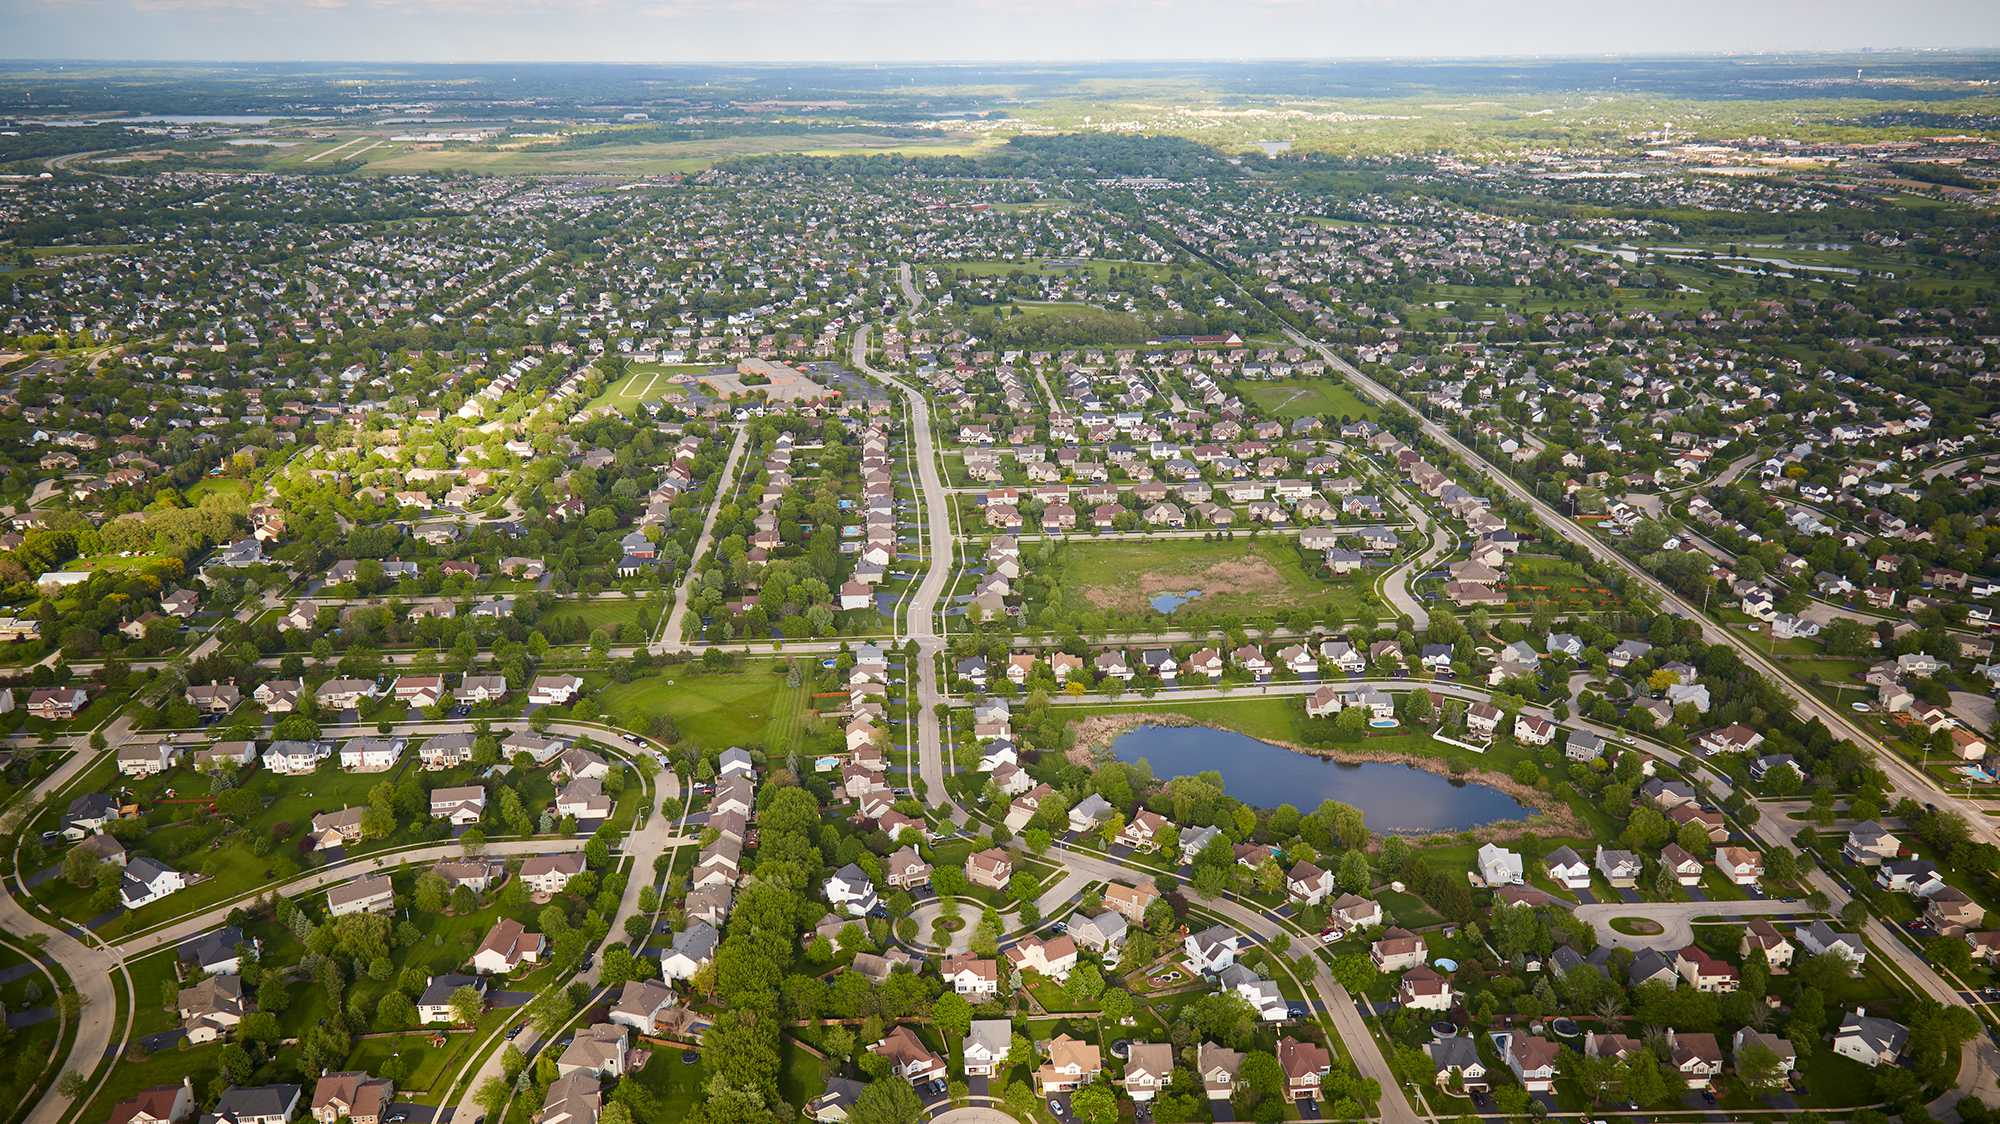 View of suburban housing from above.